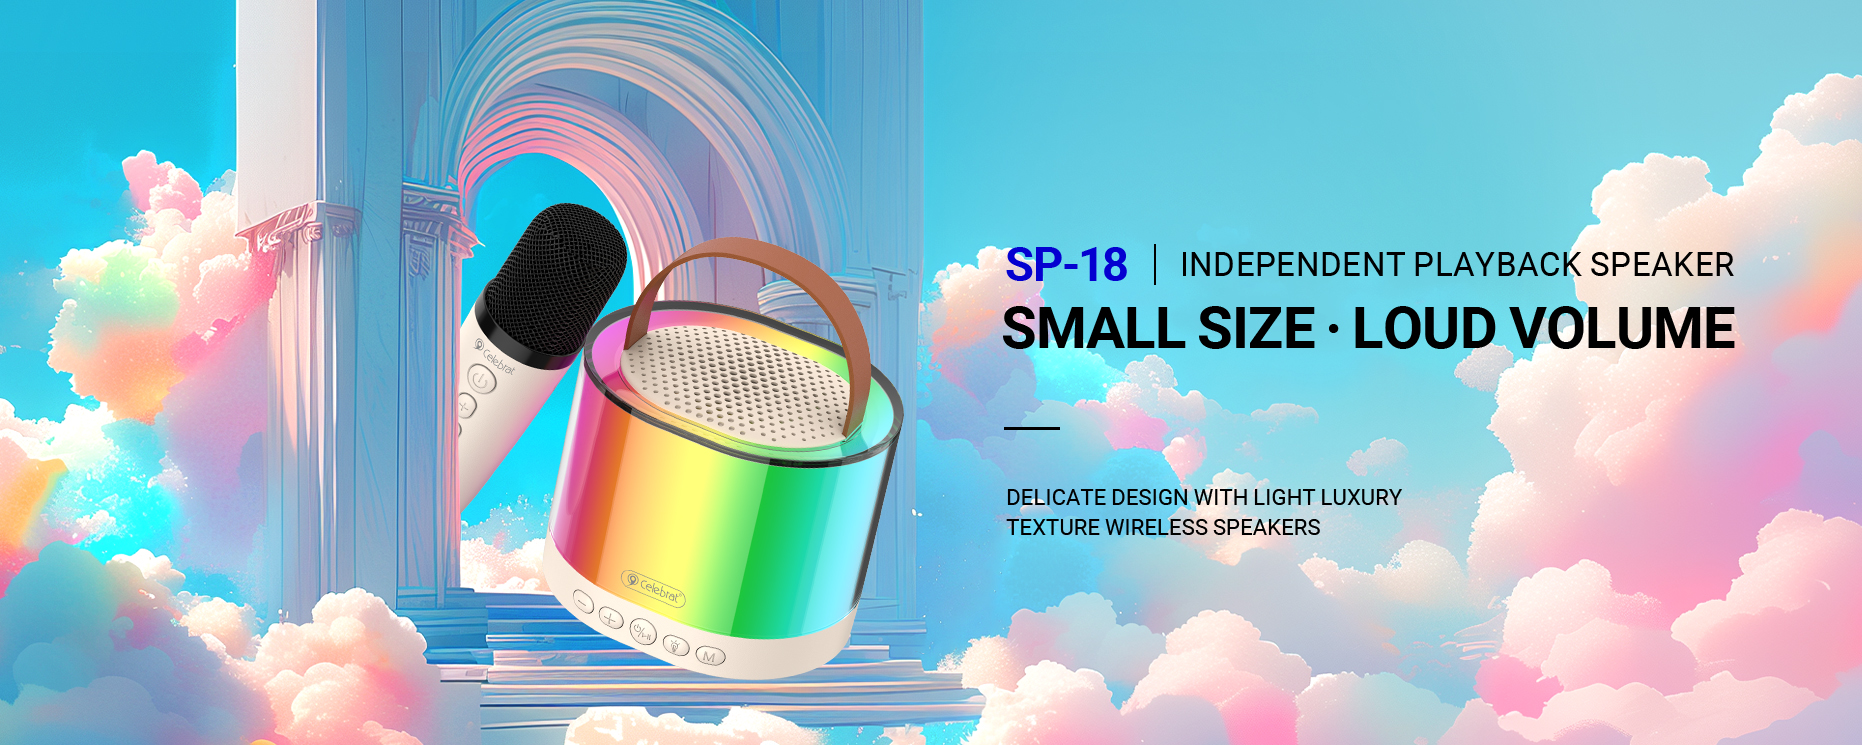 A cheap and high-quality portable Bluetooth speaker supplier in China